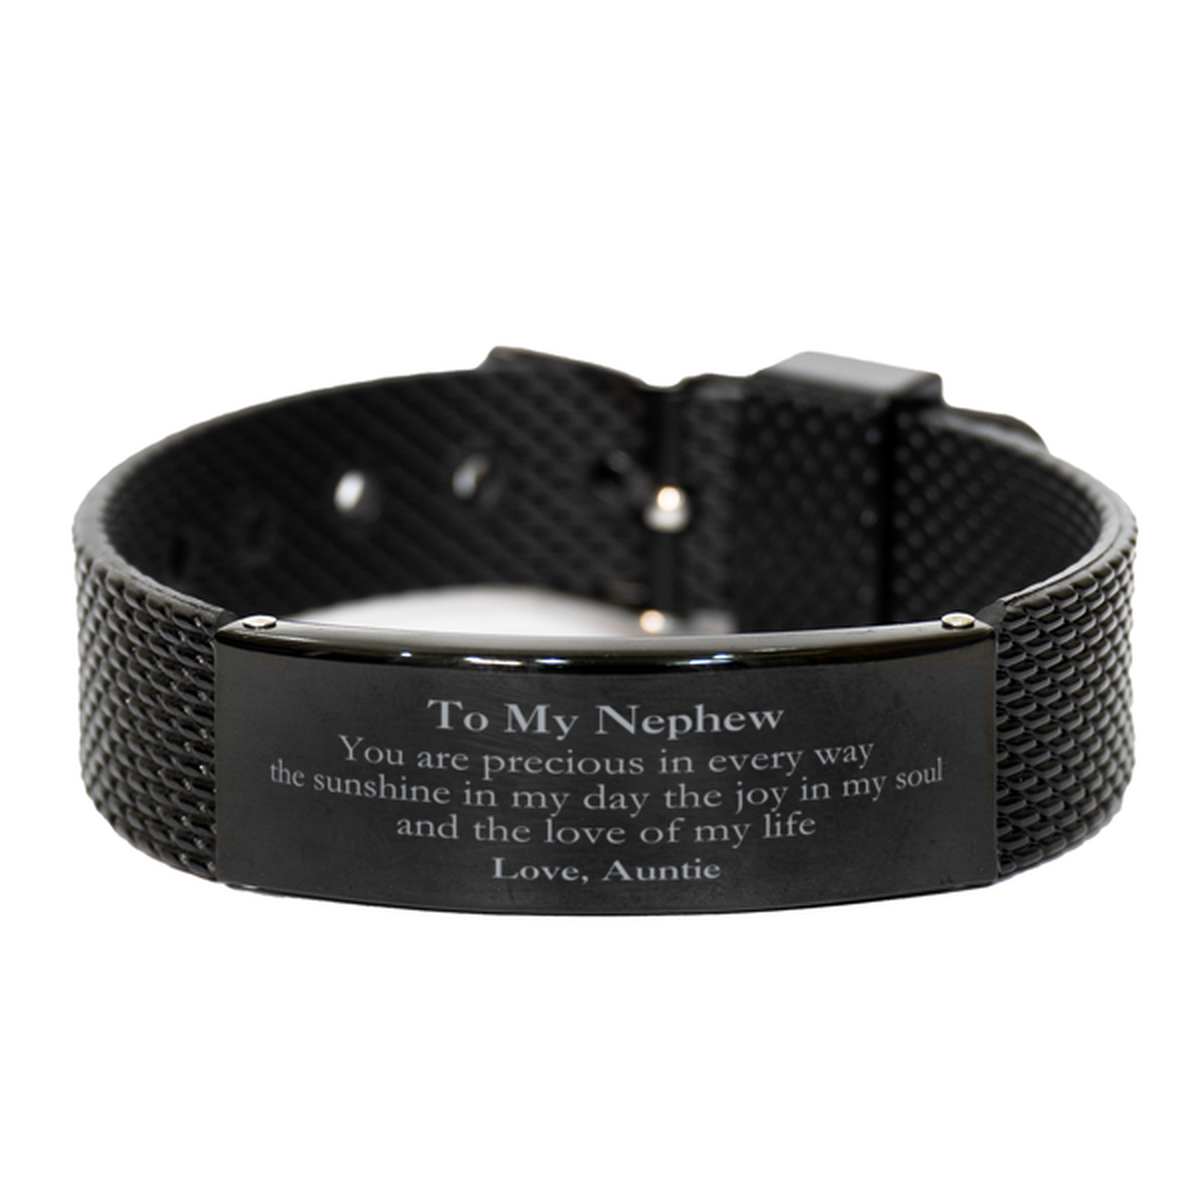 Graduation Gifts for Nephew Black Shark Mesh Bracelet Present from Auntie, Christmas Nephew Birthday Gifts Nephew You are precious in every way the sunshine in my day. Love, Auntie